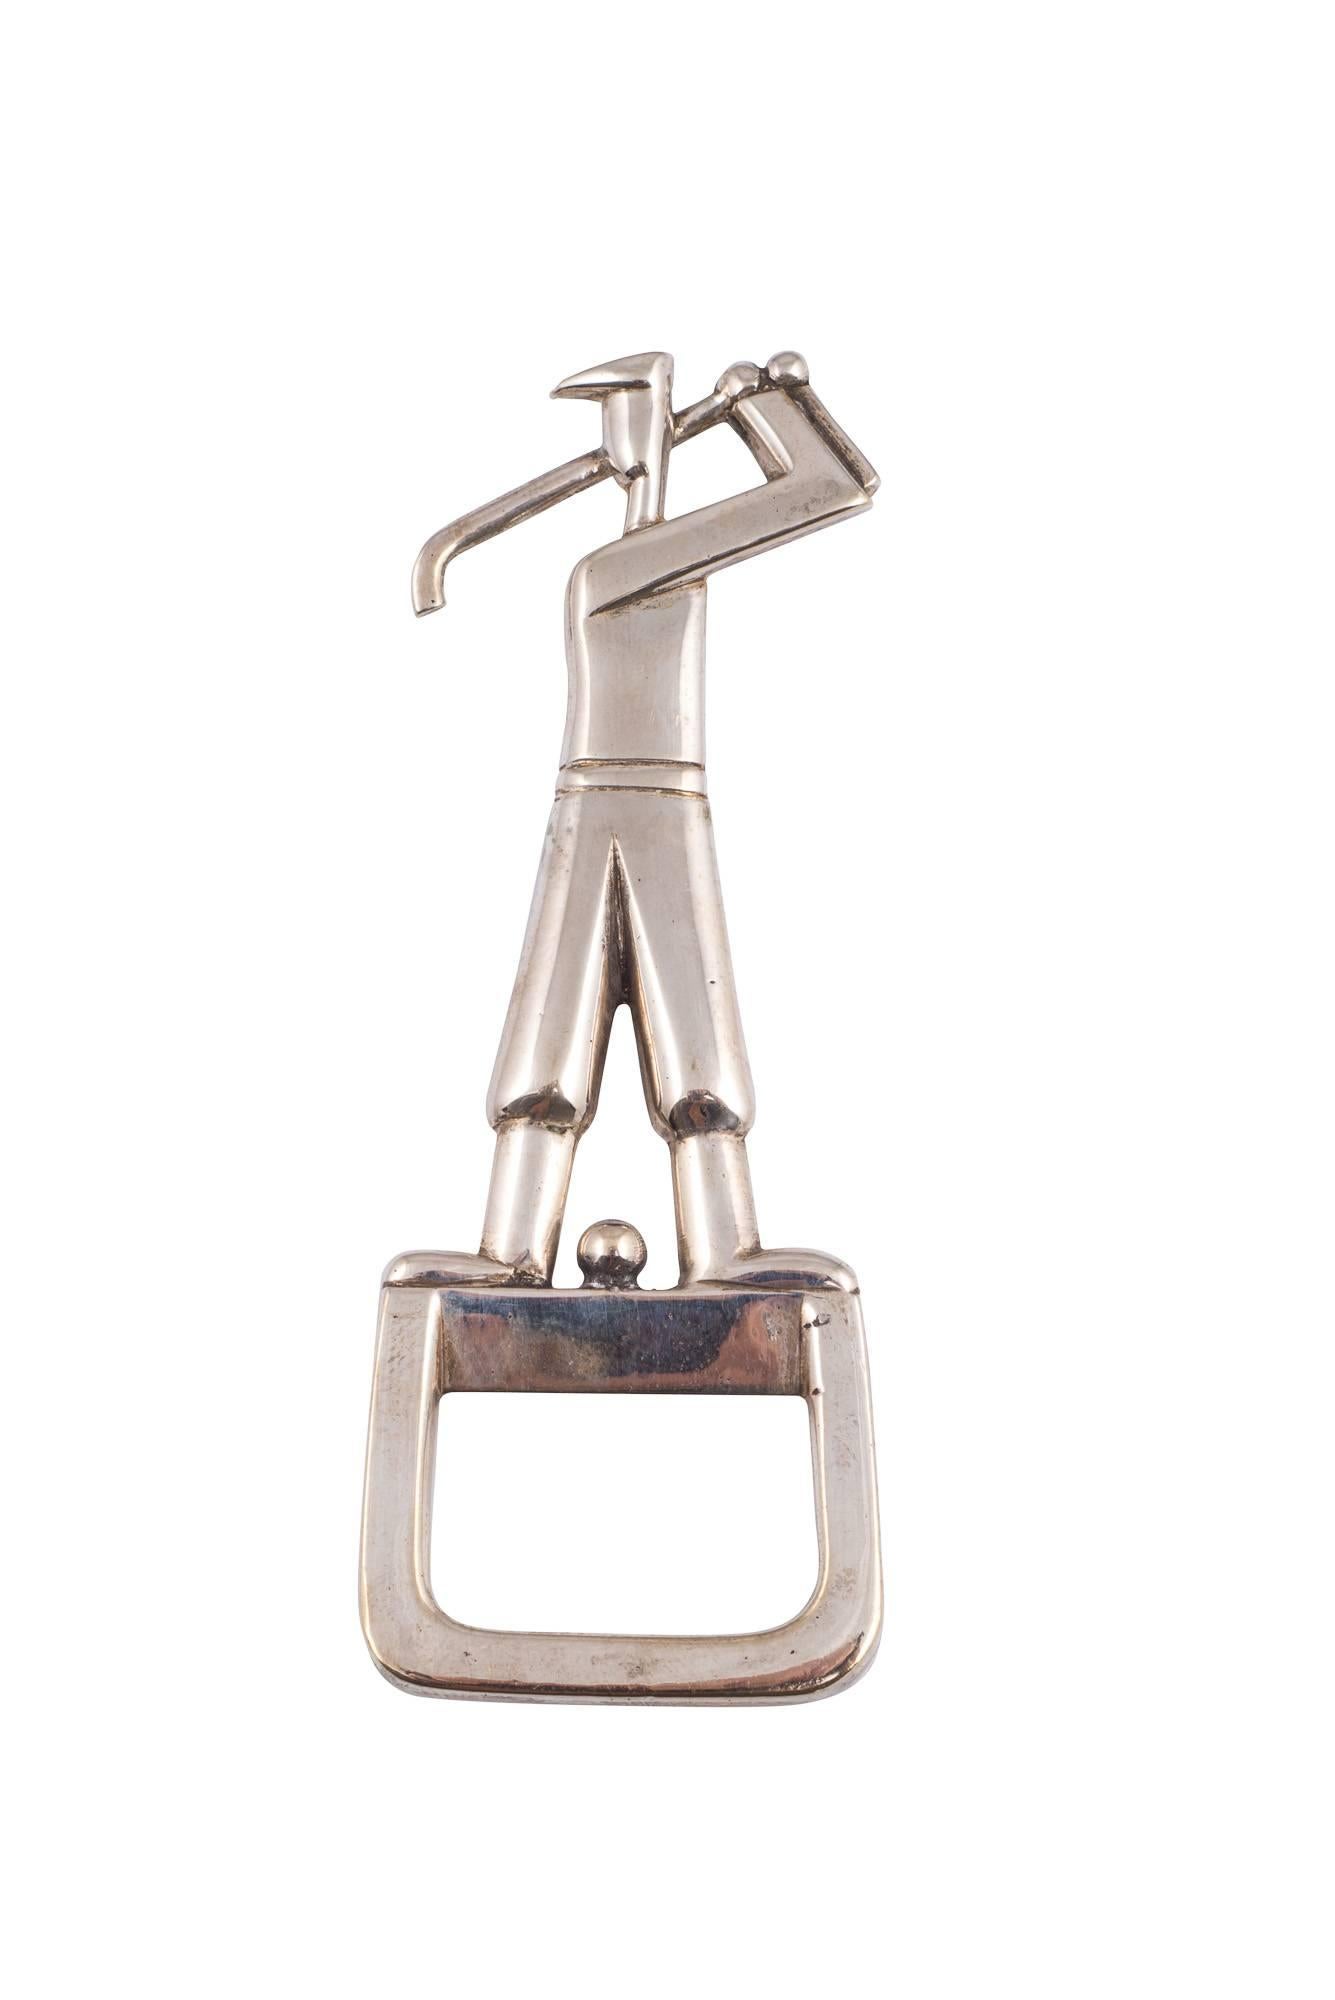 Bottle-opener and cork-screws are a well-liked and international field of collecting. Especially asked for are the depictions of sportsmen and -women. In our case it is a golfer. The bottle opener is in a very good, unused condition and is marked